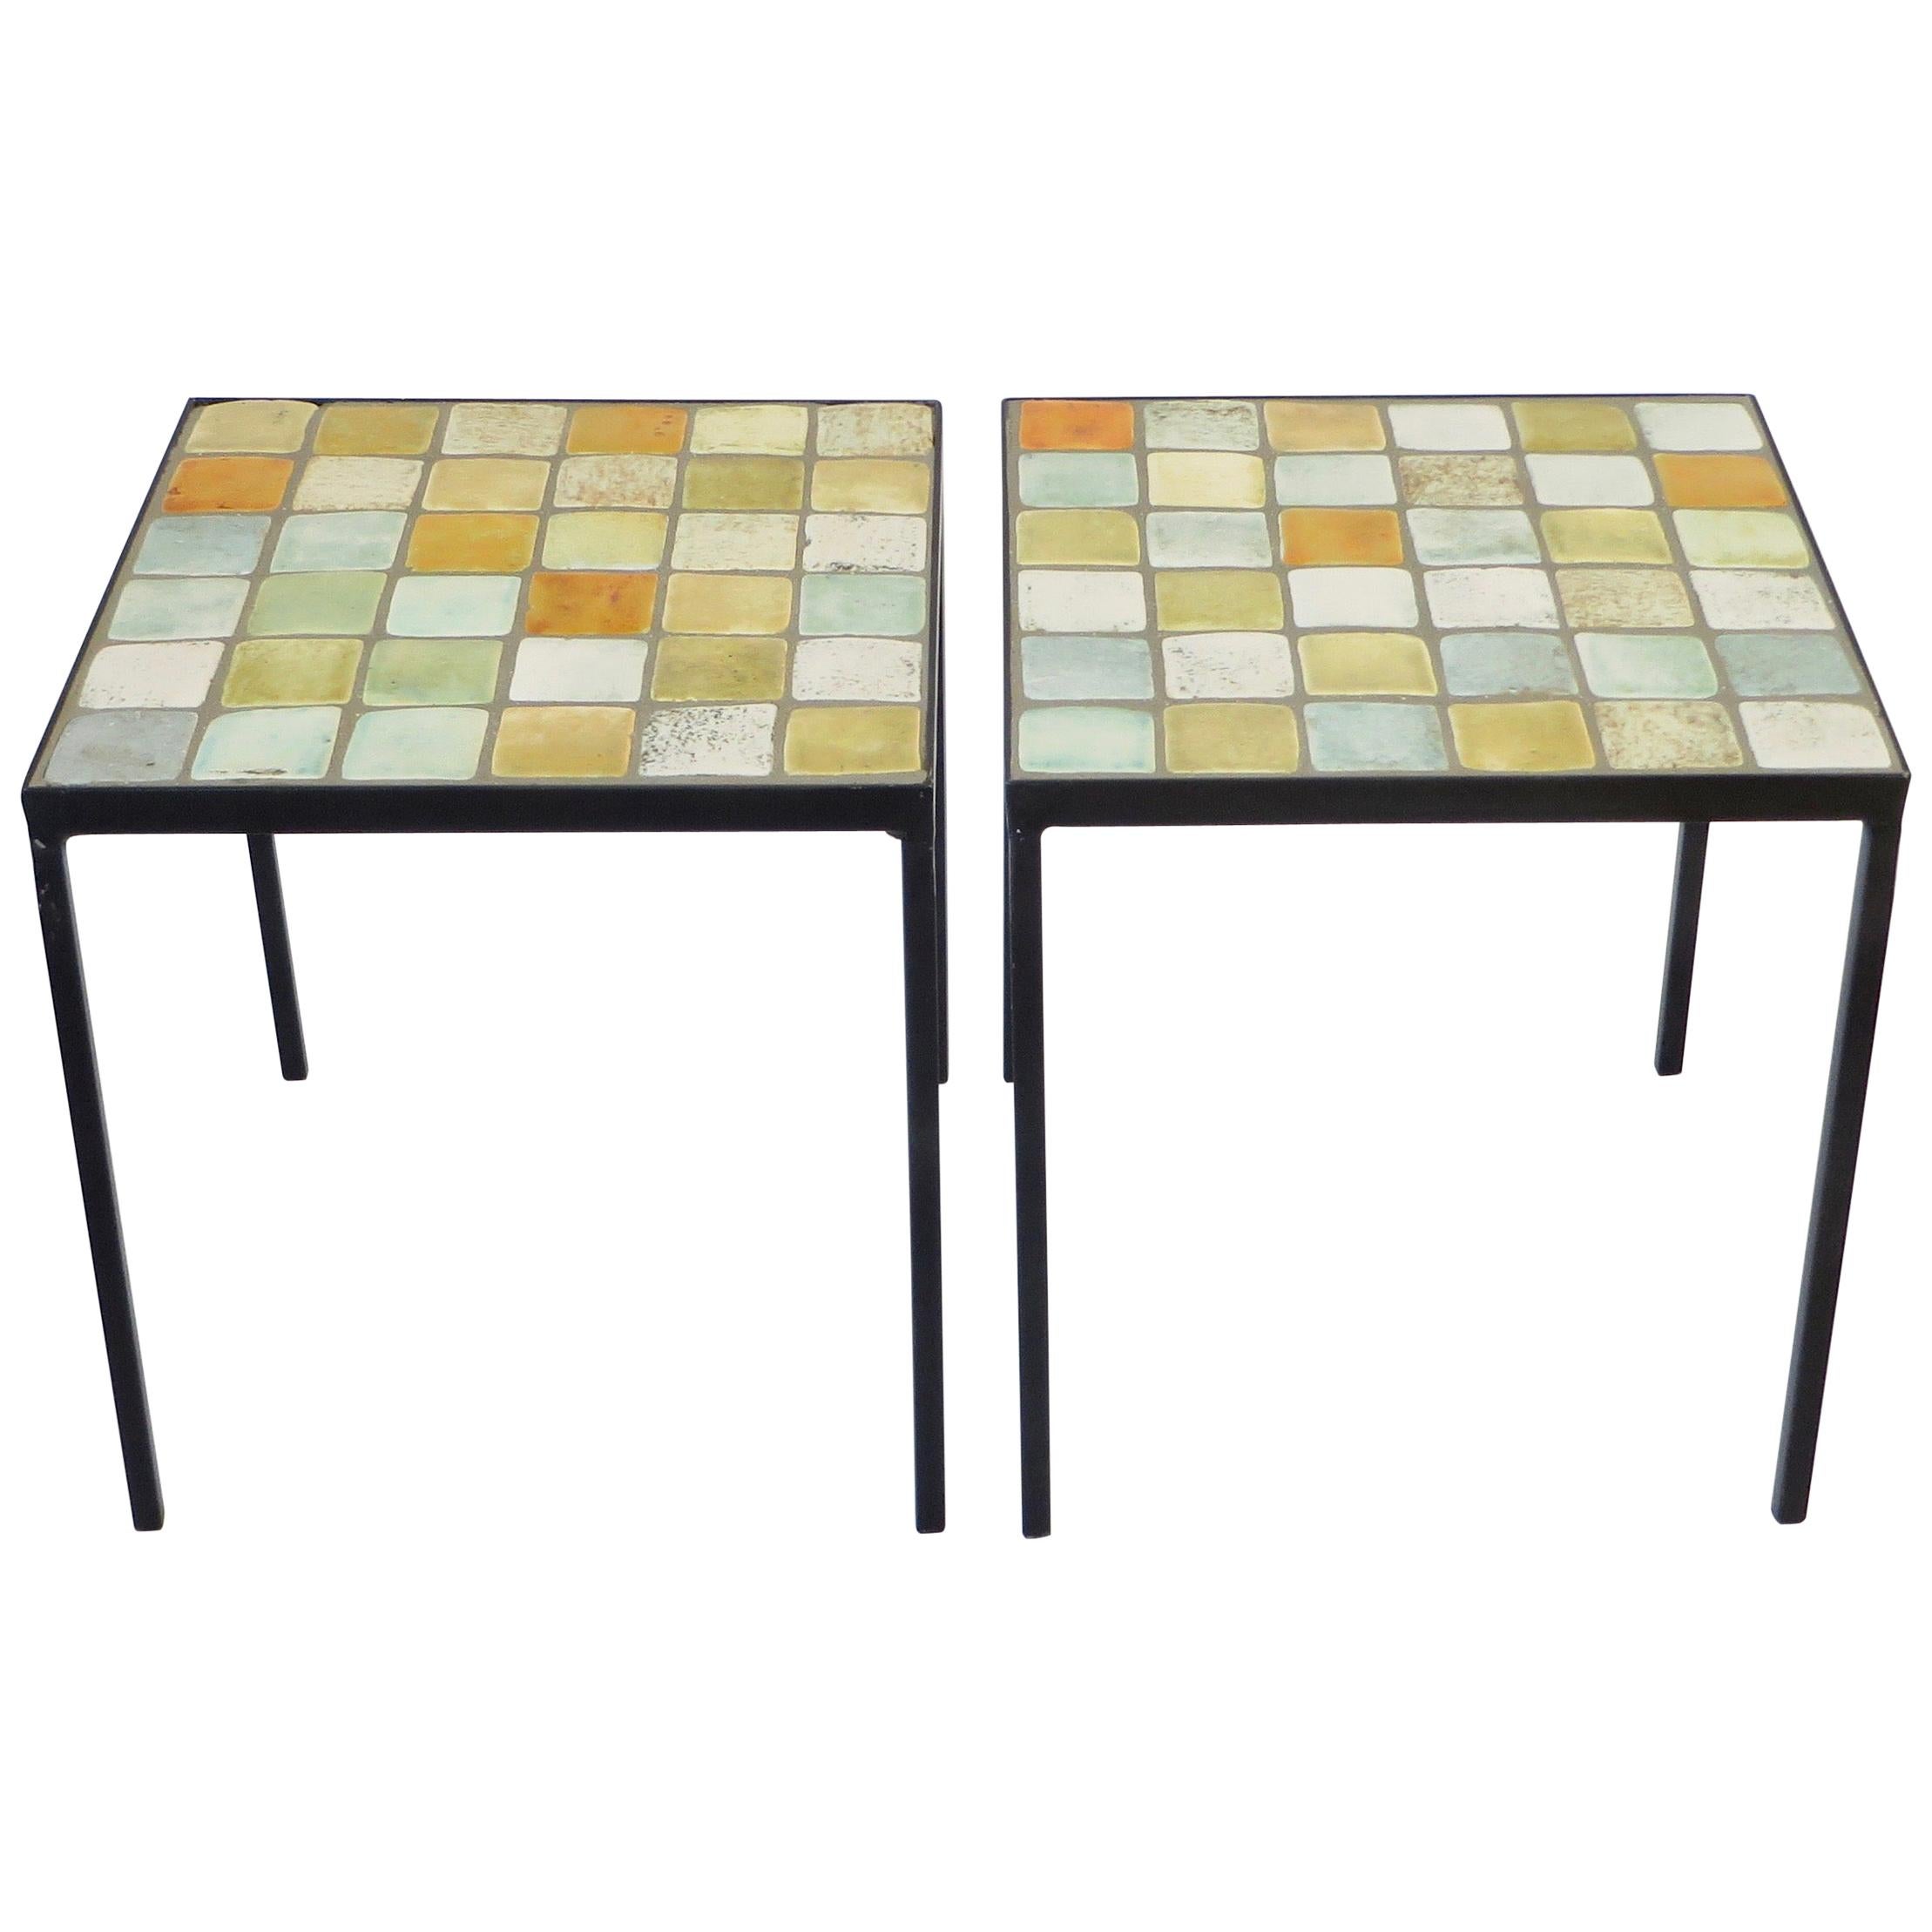 Les 2 Potiers French Ceramic Tile Pair of Side End or Small Coffee Tables